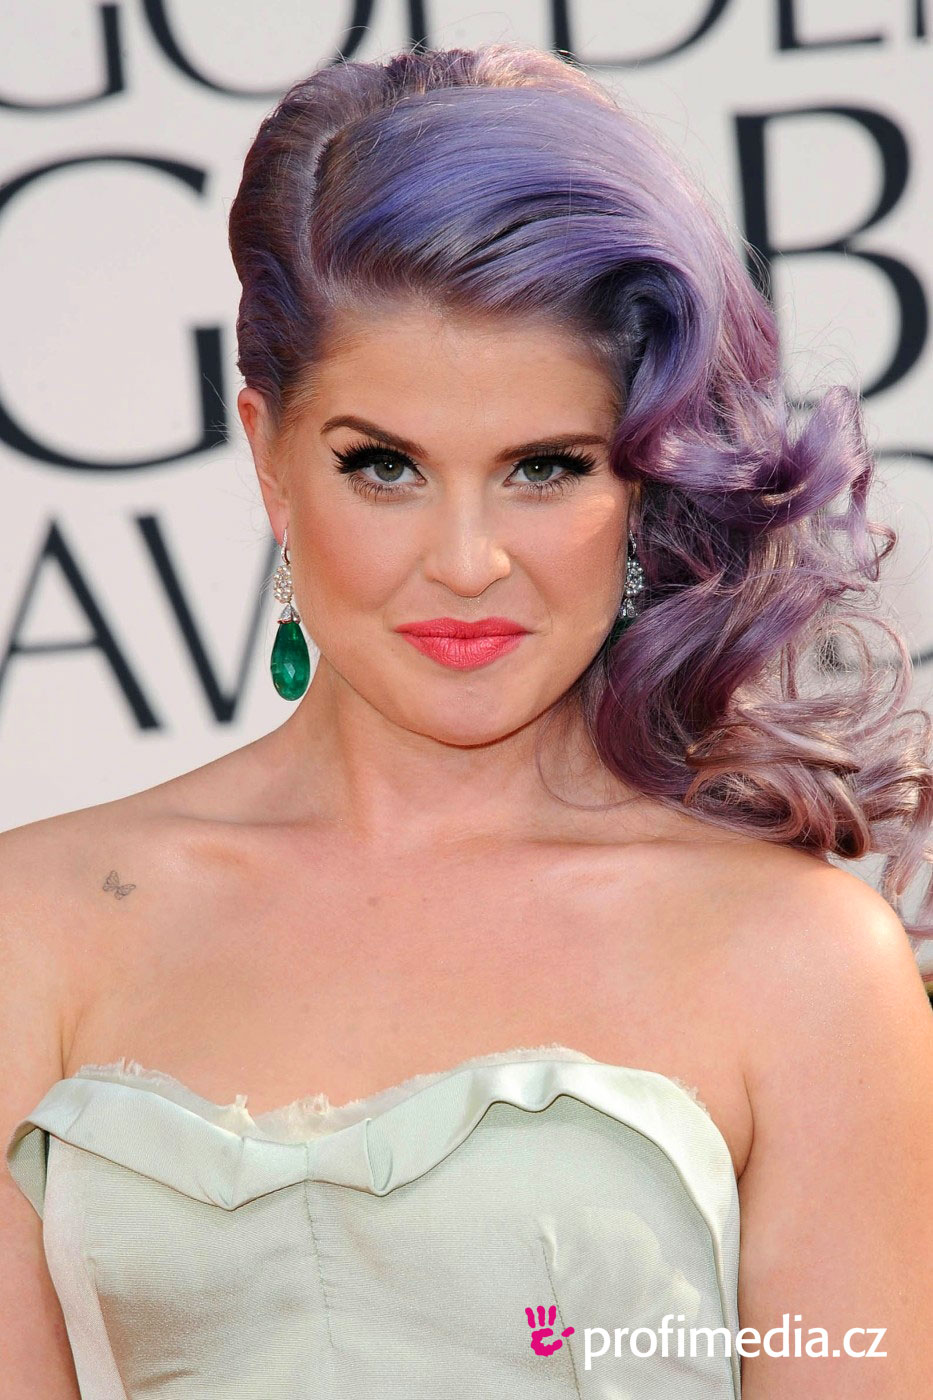 Do you think Kelly Osbourne totally sexy and hot